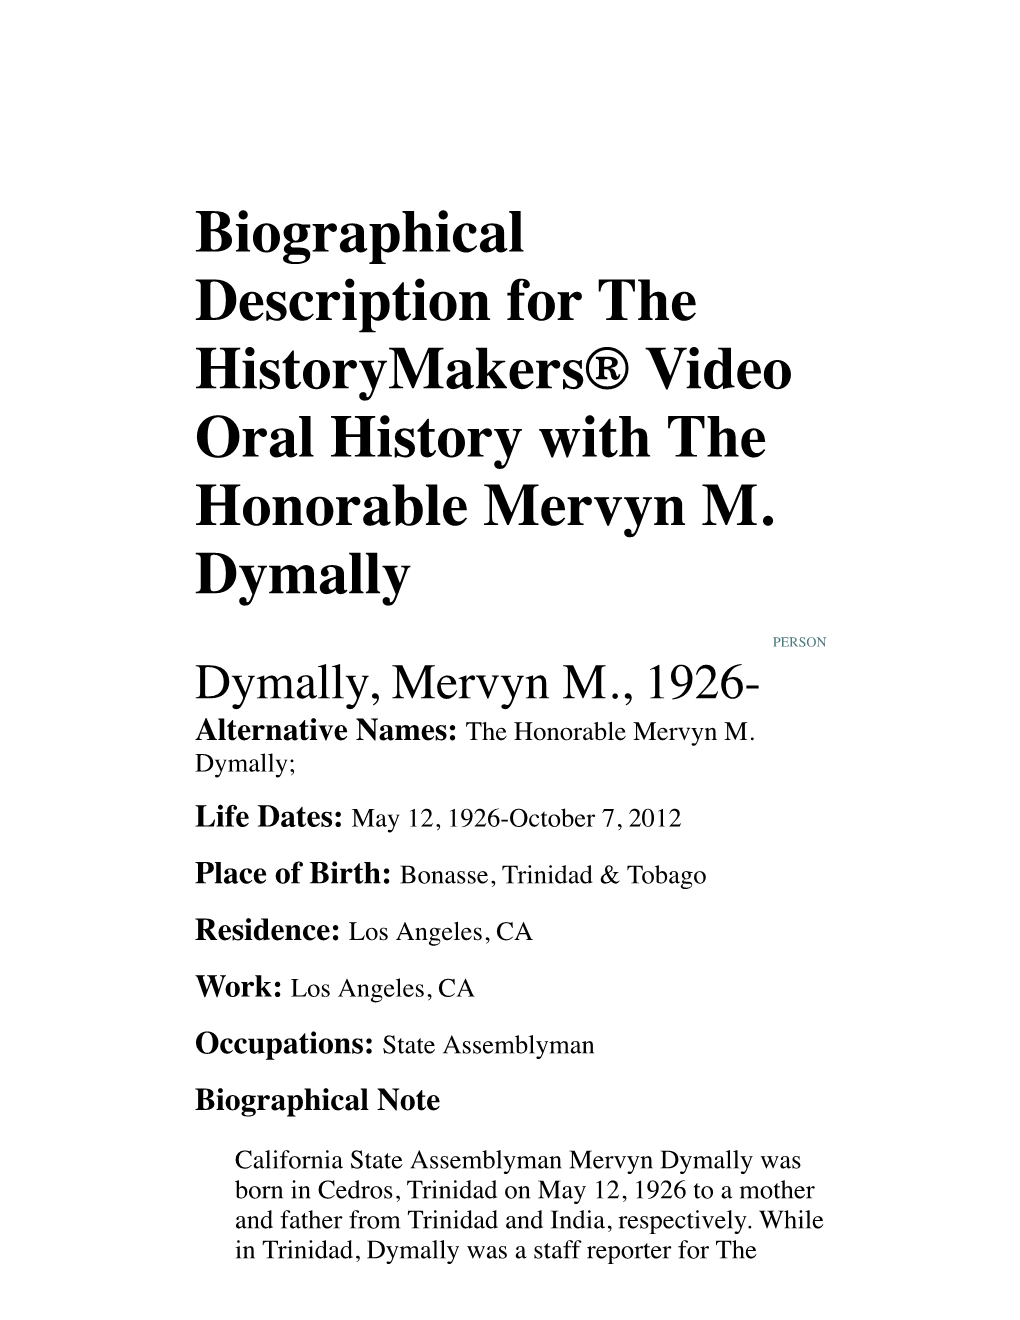 Biographical Description for the Historymakers® Video Oral History with the Honorable Mervyn M